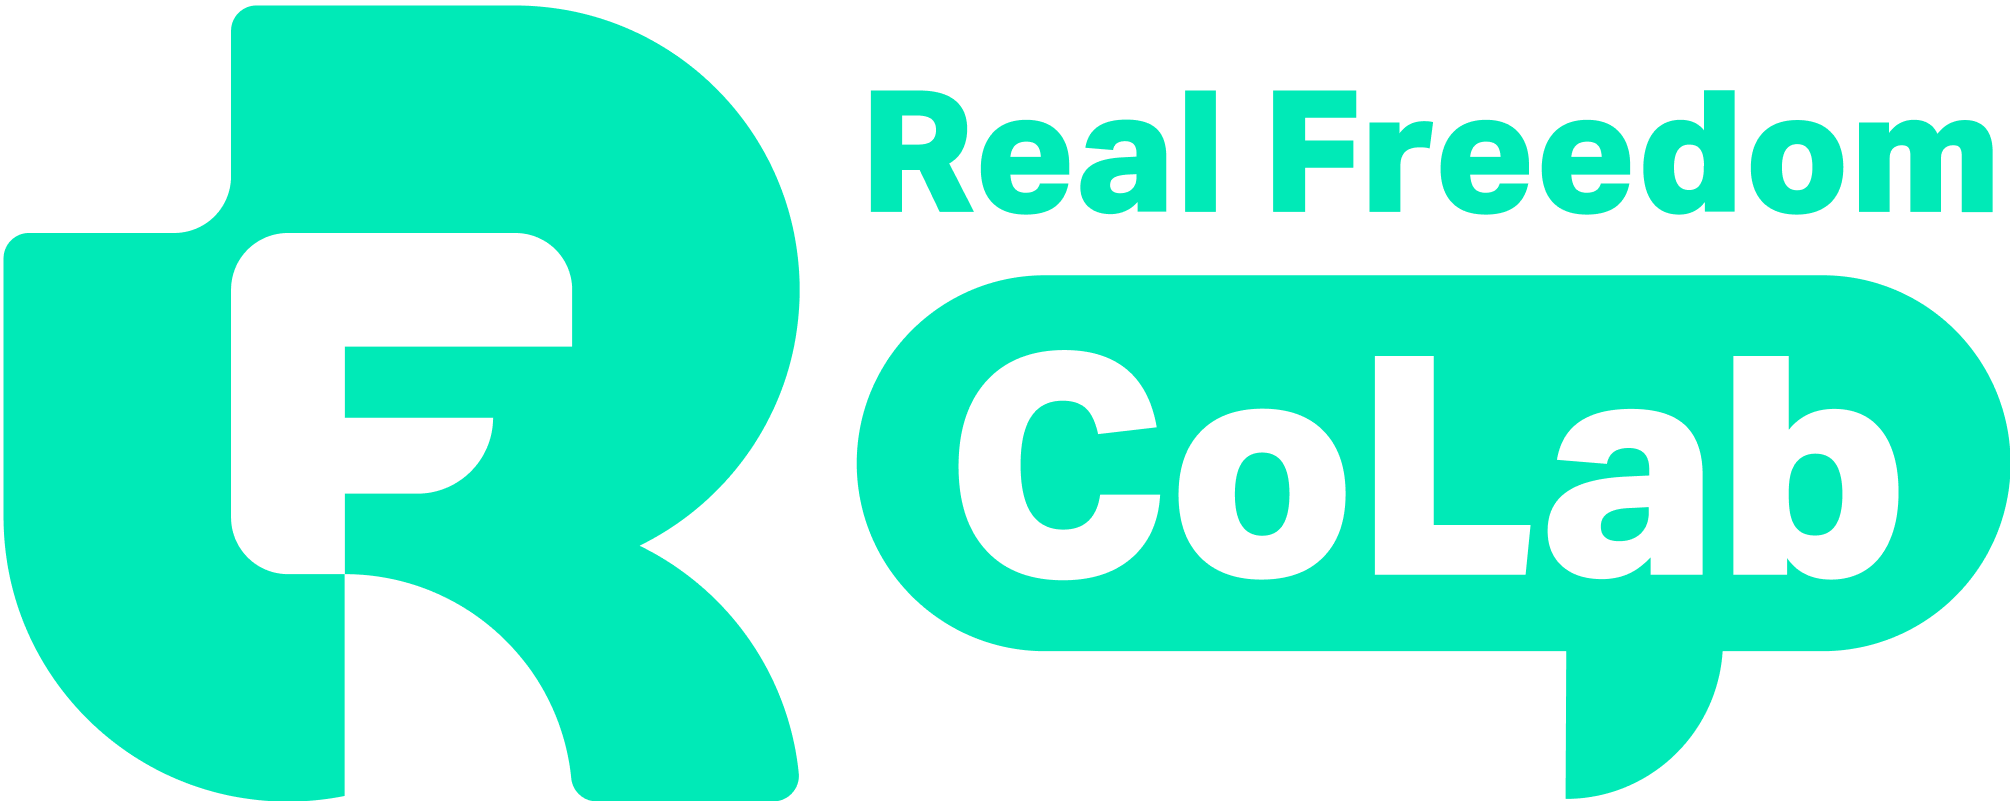 Real Freedom CoLab